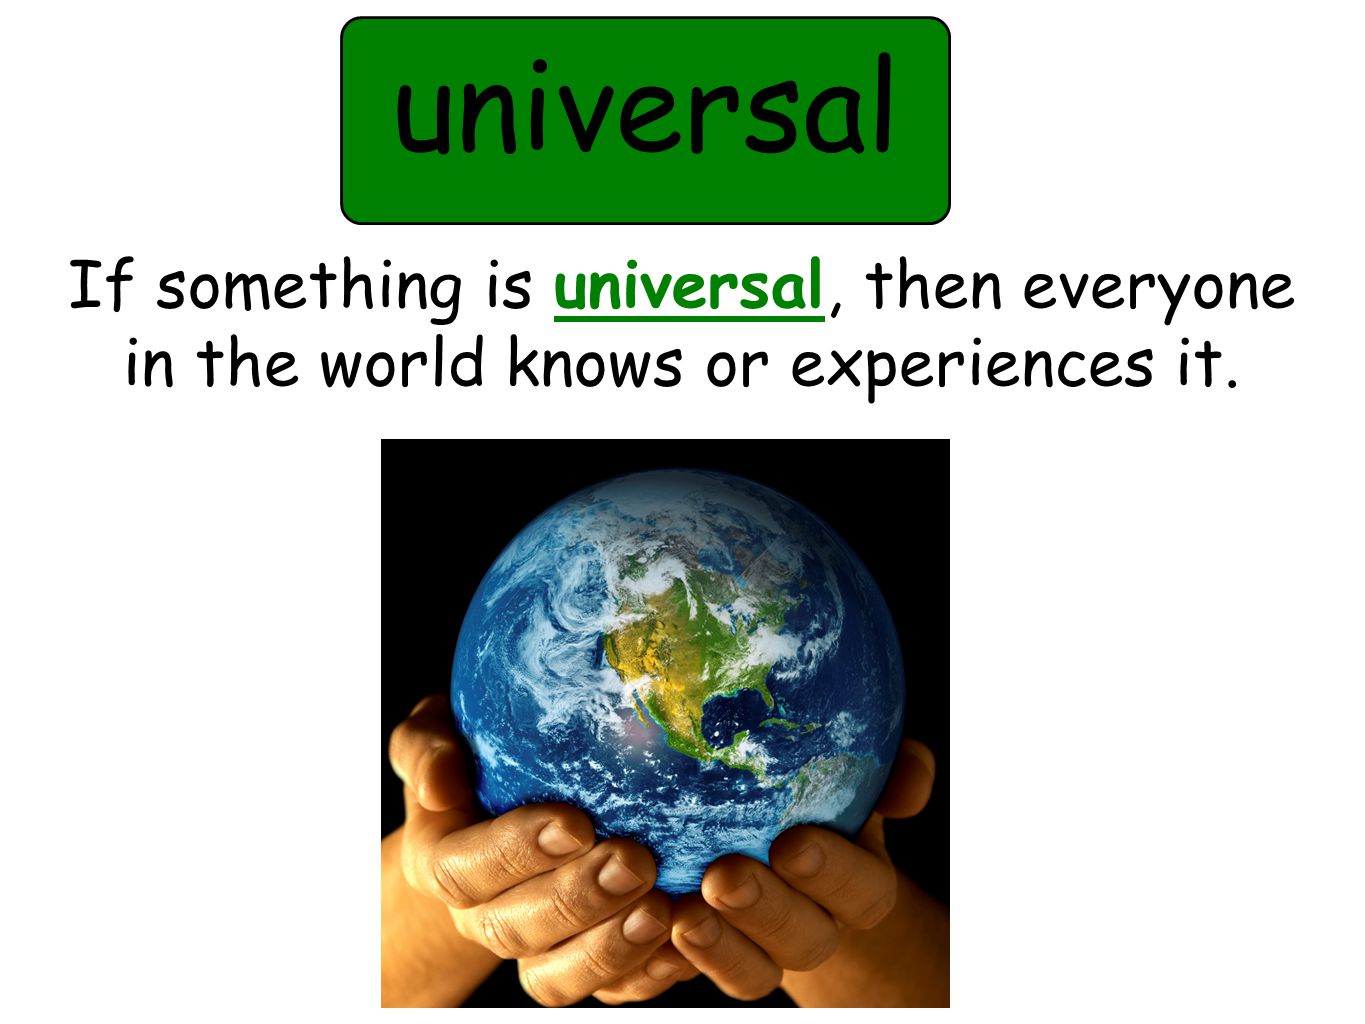 universal If something is universal, then everyone in the world knows or experiences it.